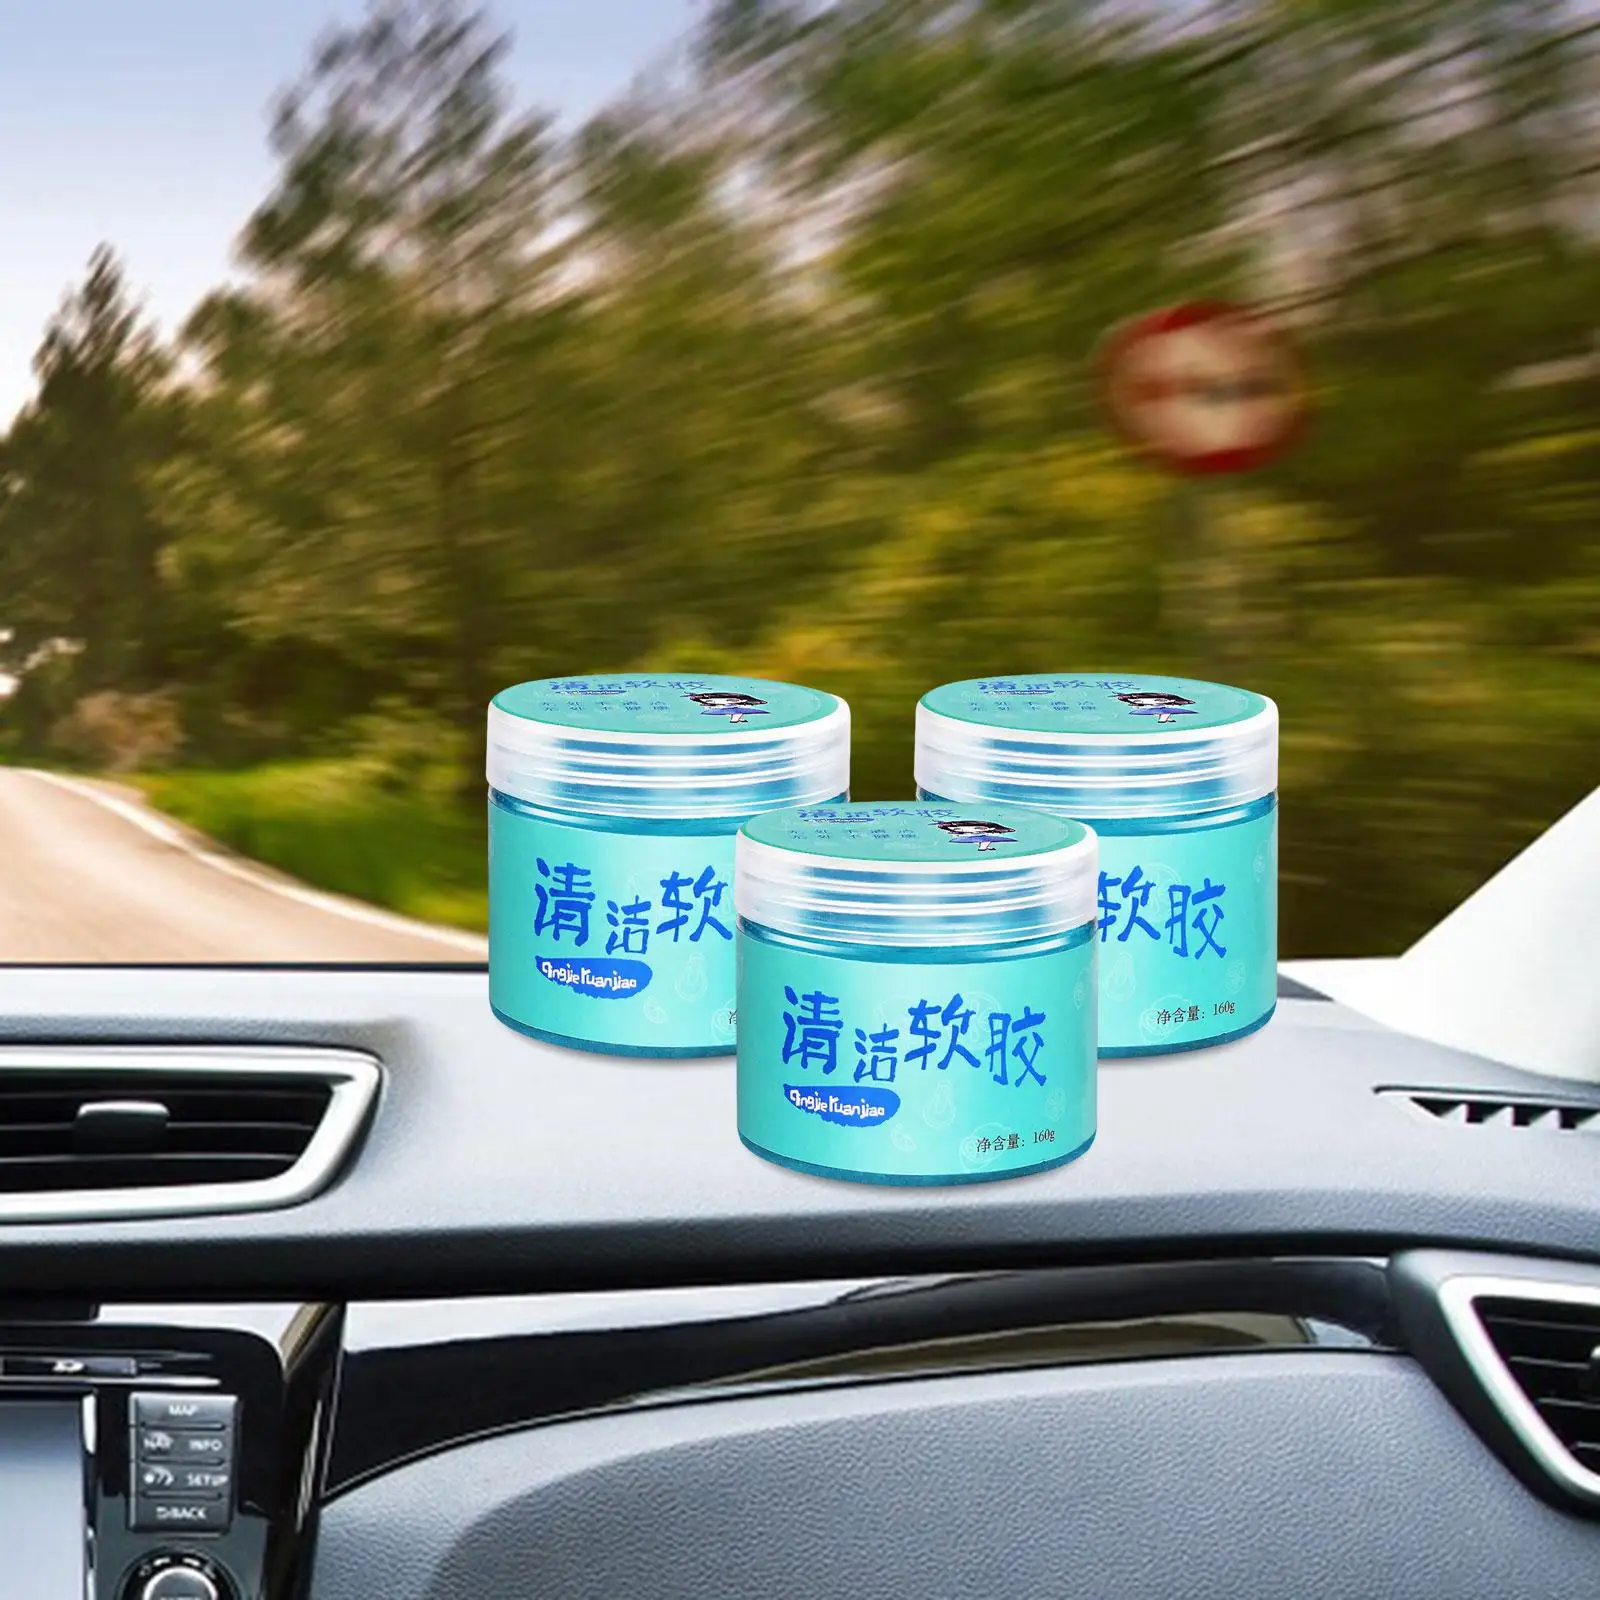 Dust Cleaning Mud Universal Auto Detailing Tools Car Cleaner Putty Interior for Camera Keyboard Laptop Office Tablet